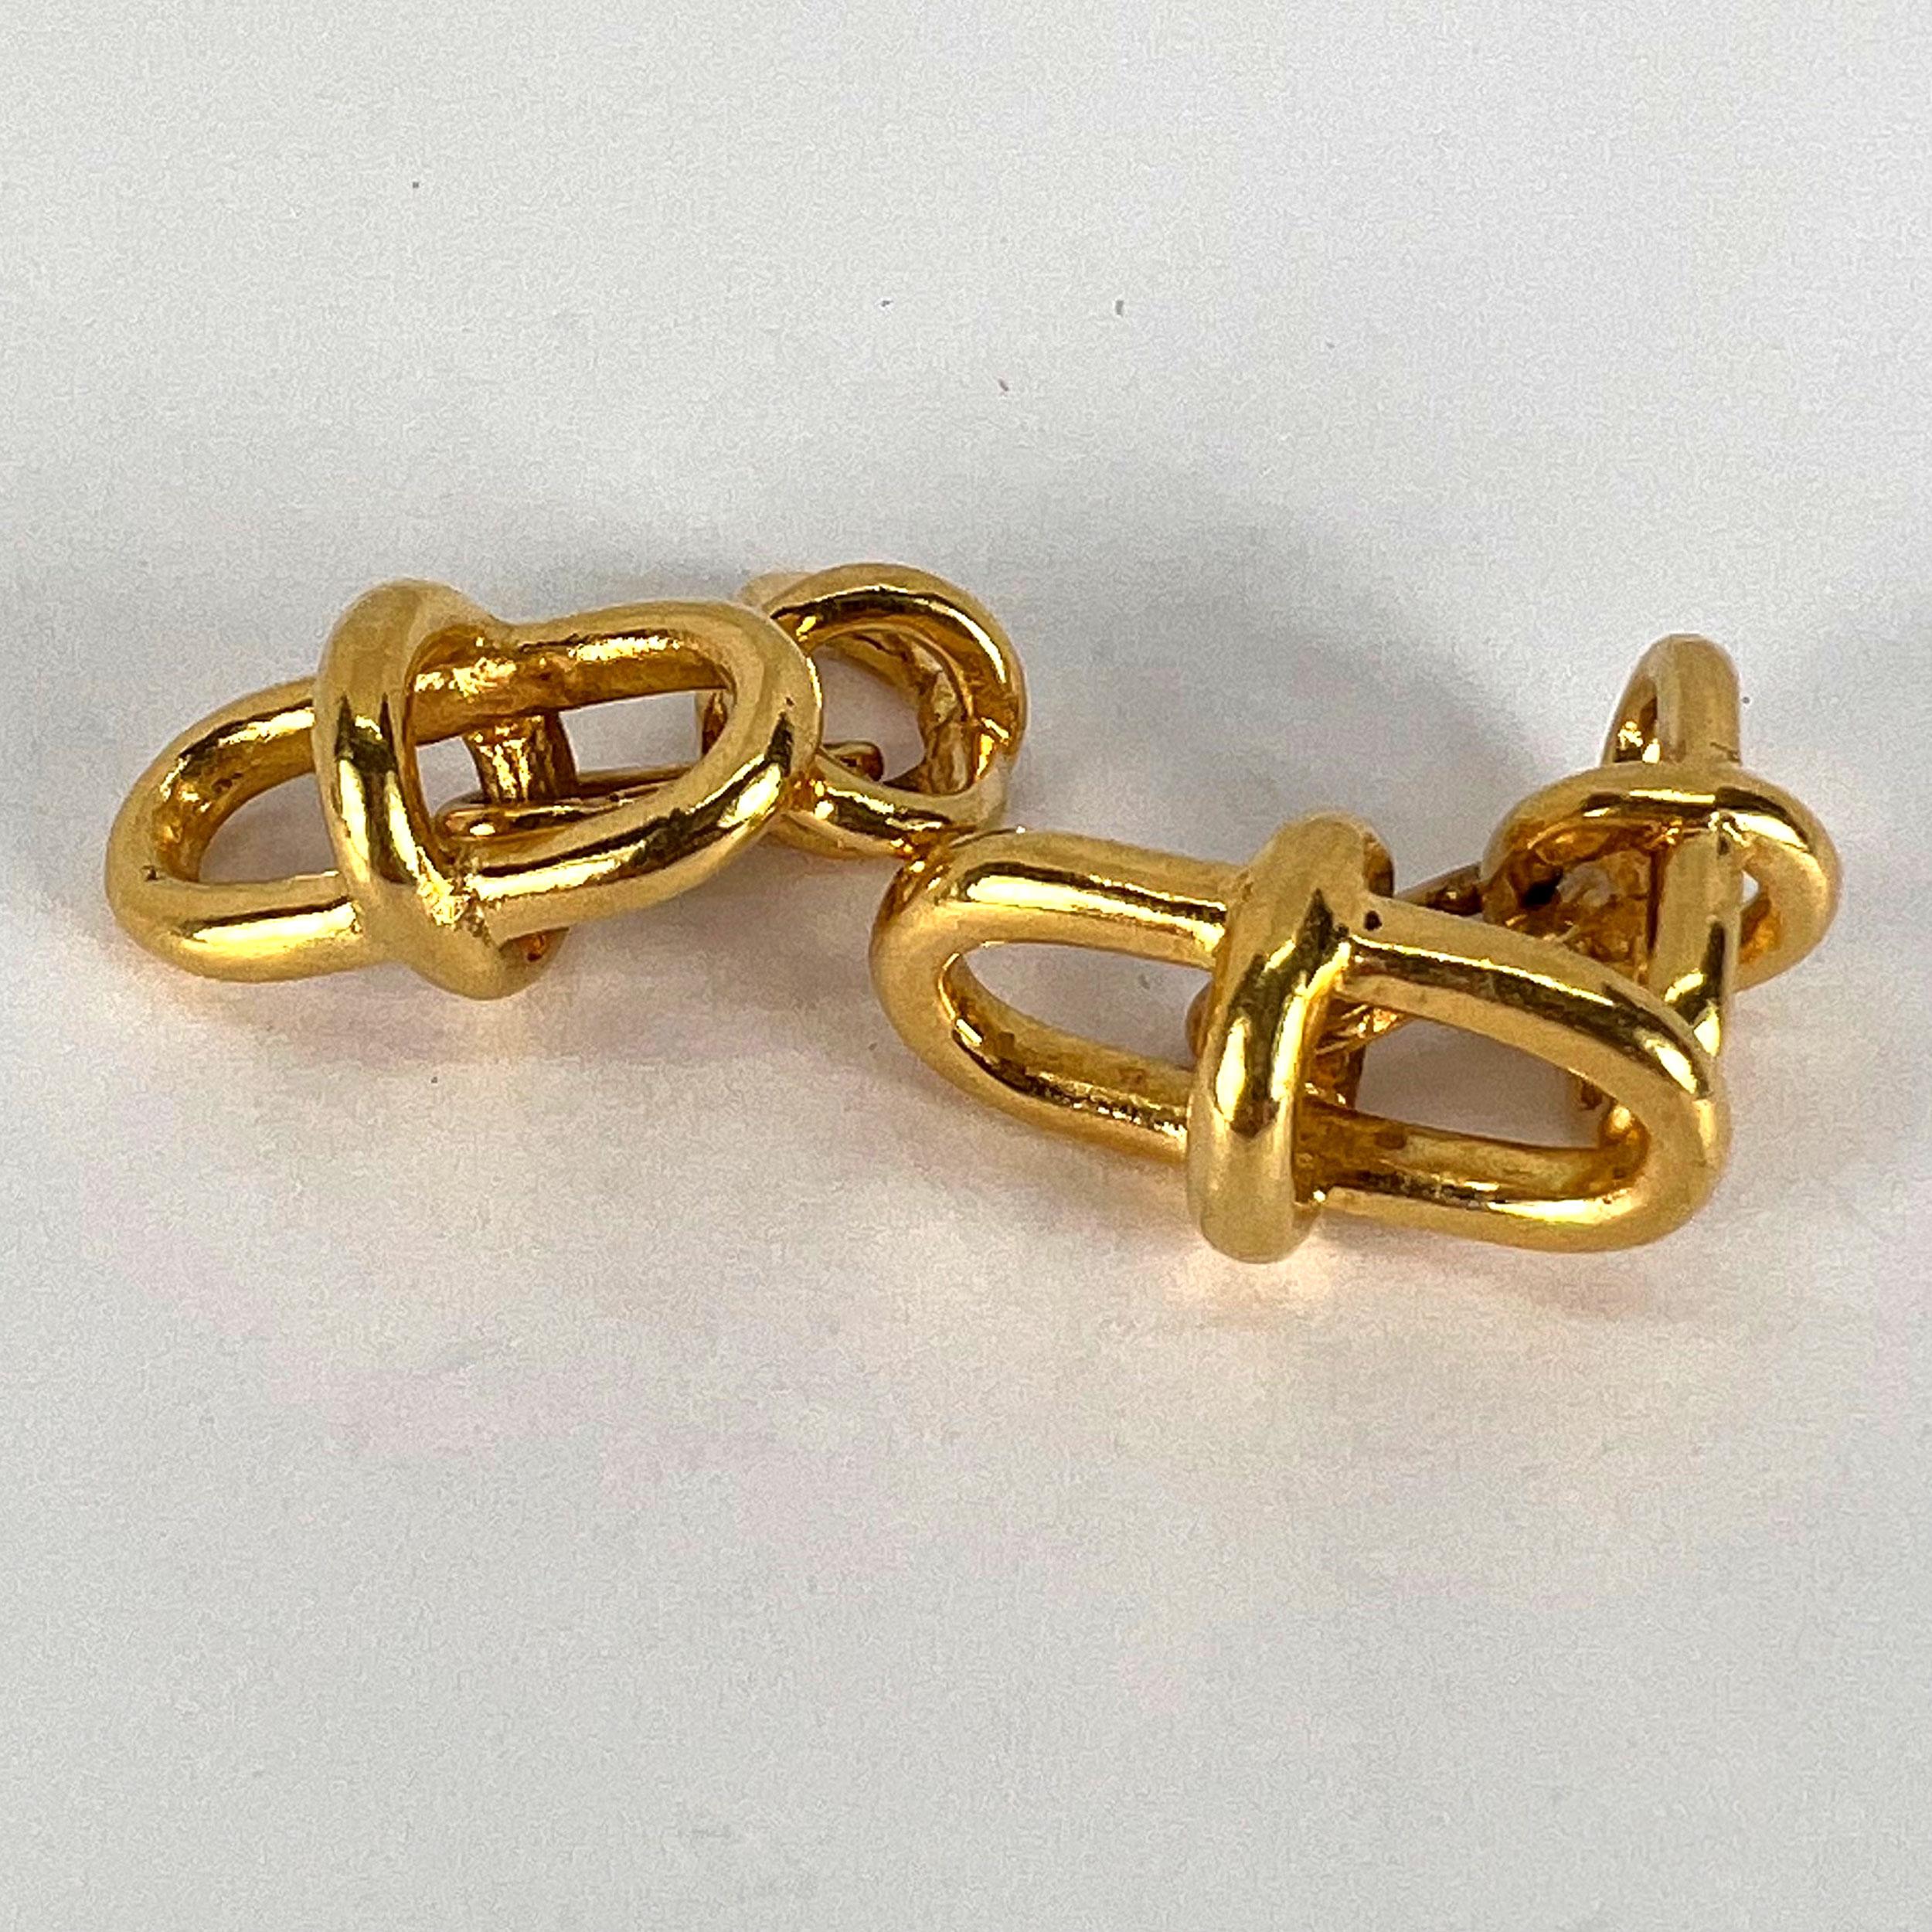 18K Yellow Gold Marine Chain Link Cufflinks In Good Condition For Sale In London, GB